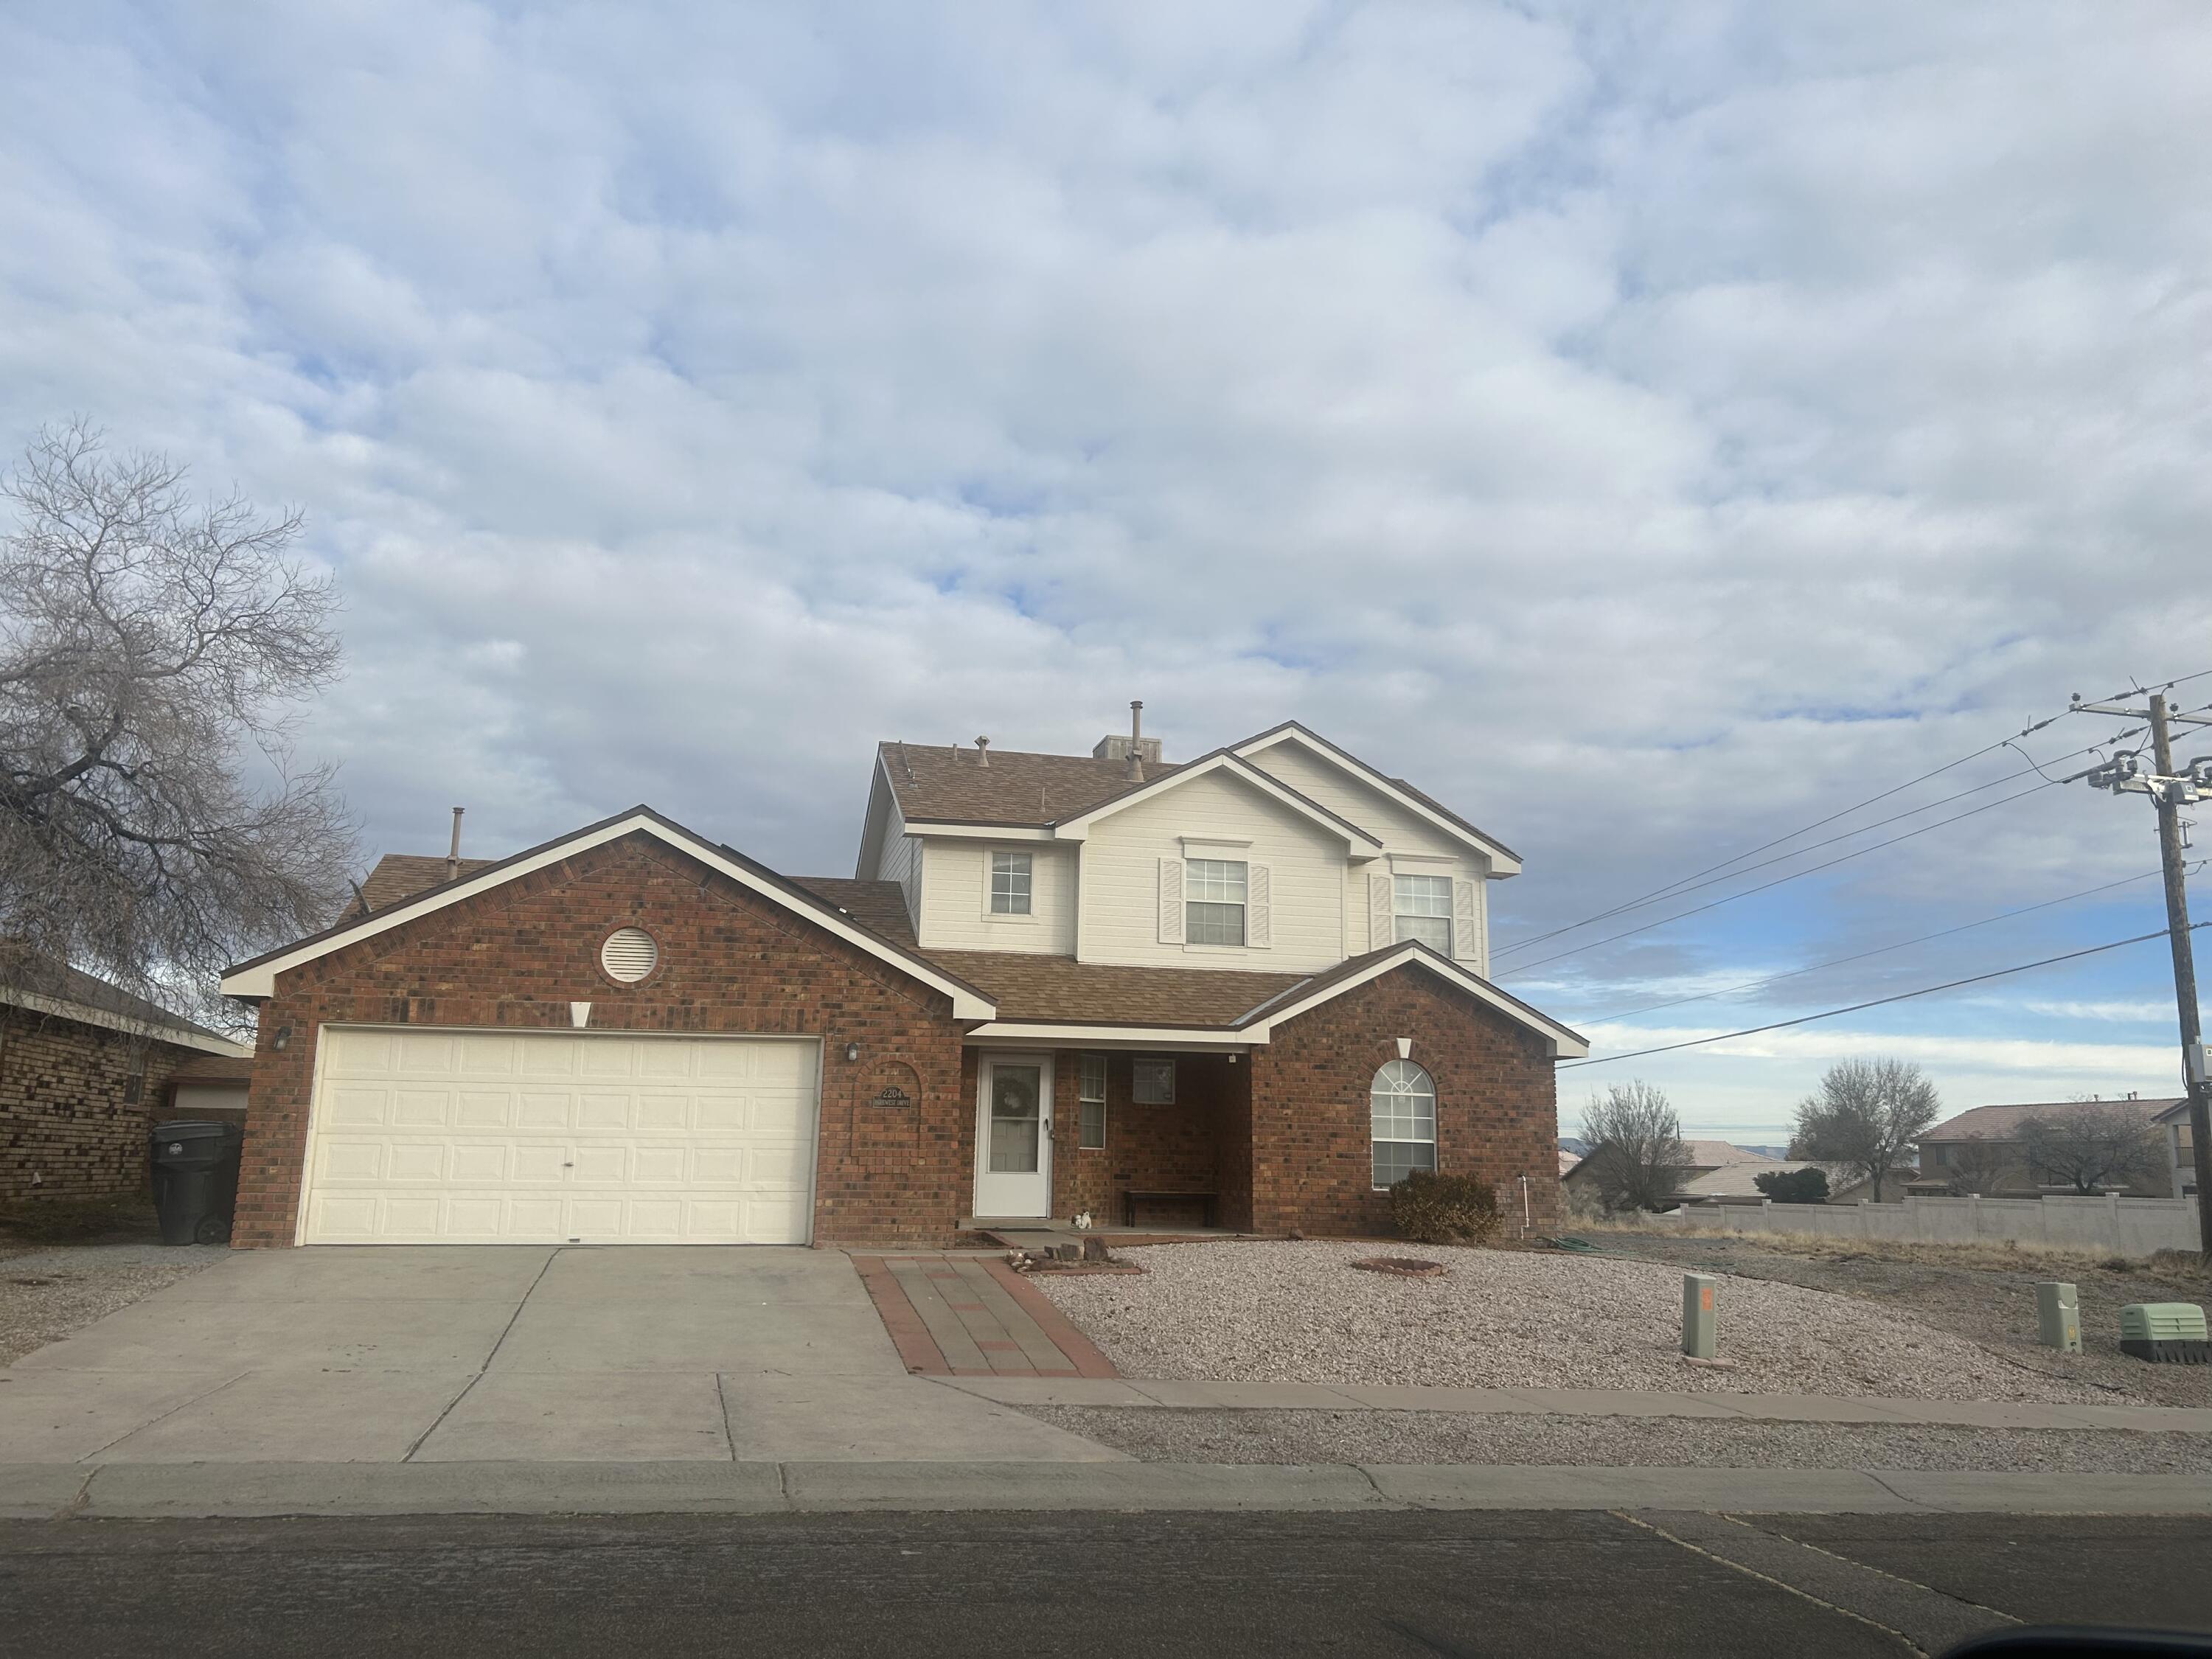 Very well maintained Brick home in North West area. This 3 bedroom 2 bath is move in ready waiting for a new owner. Refrigerator, Washer and Dryer convey. Master bedroom is on the main level, and has an upper loft for study, office, or exercise room. This large corner lot has a upper Balcony with beautiful views of the Sandia mountains. Bring all offers won't last long!